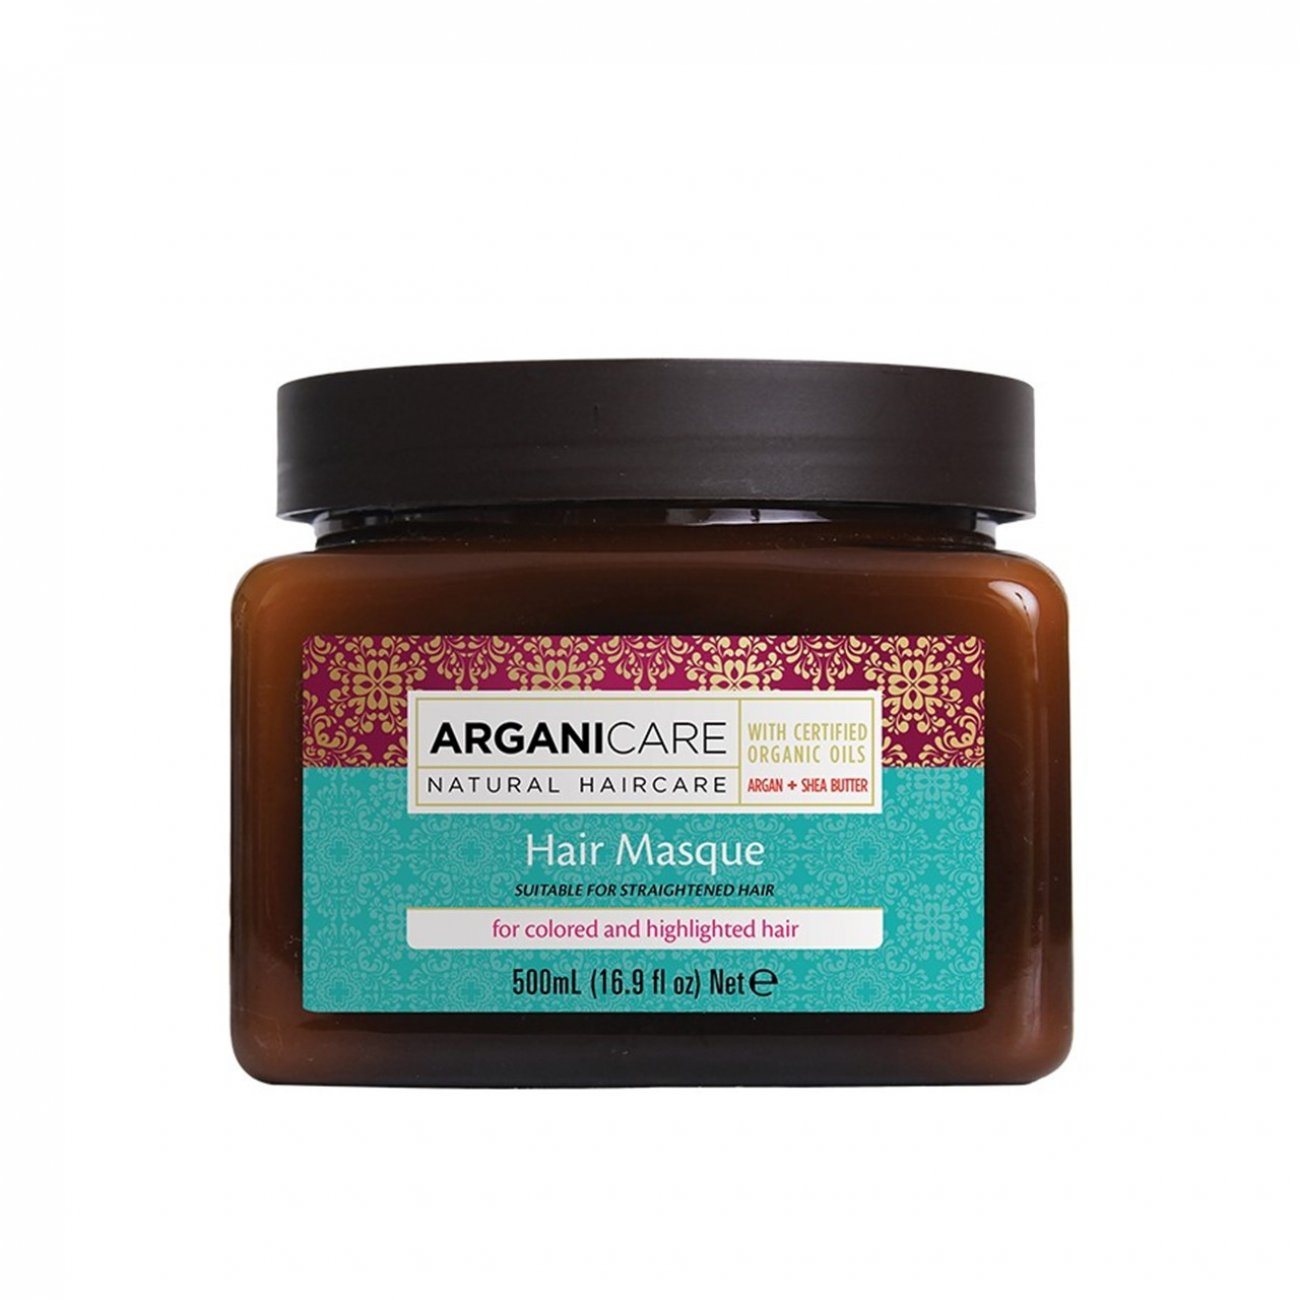 Arganicare Hair Masque for Colored & Highlighted Hair 500ml